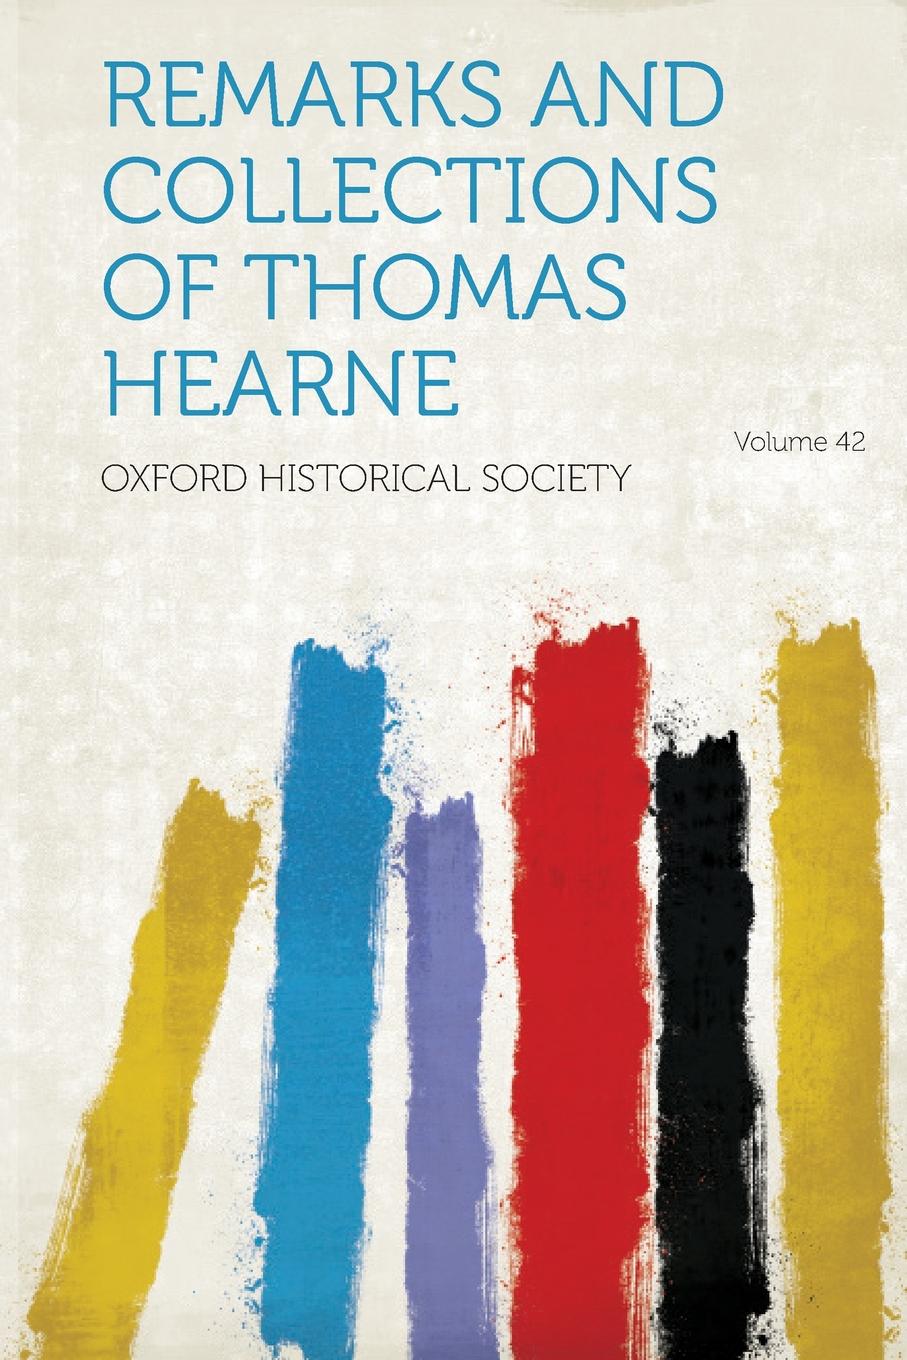 Remarks and Collections of Thomas Hearne Volume 42